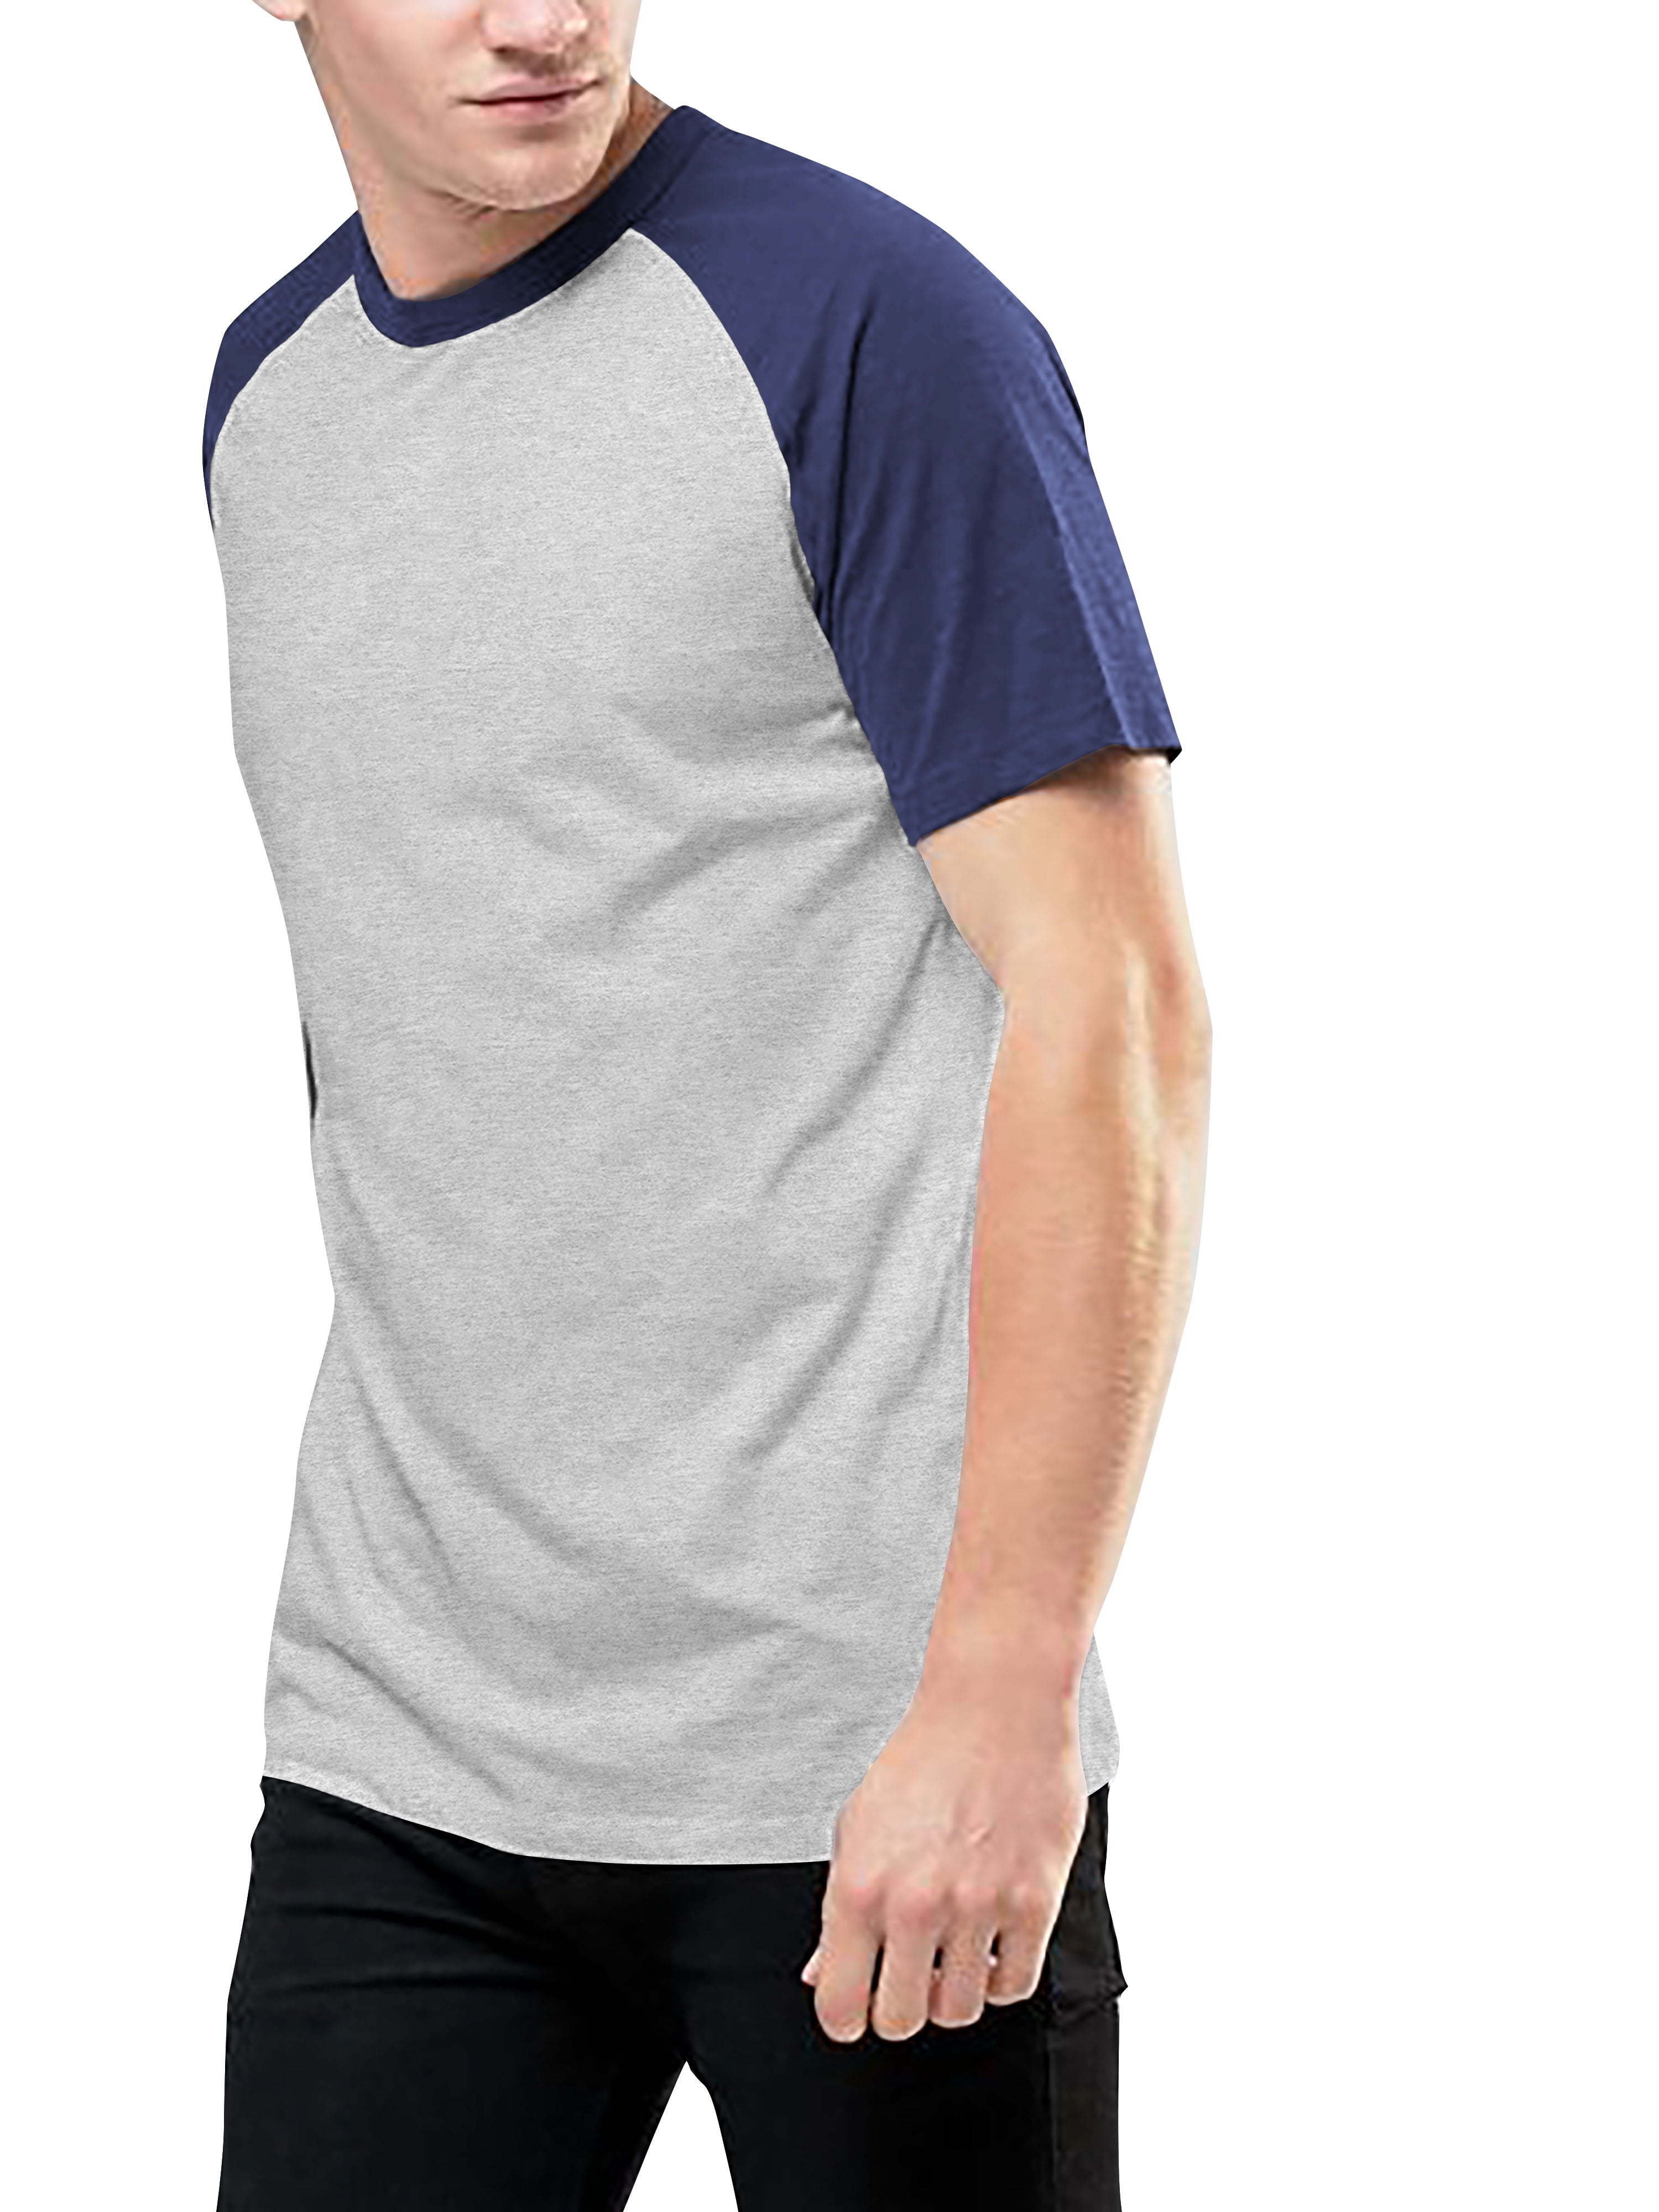 Men T-Shirt Short Sleeve Casual Fashion Slim Fit Round Neck Classic Contrast Tee Tops 